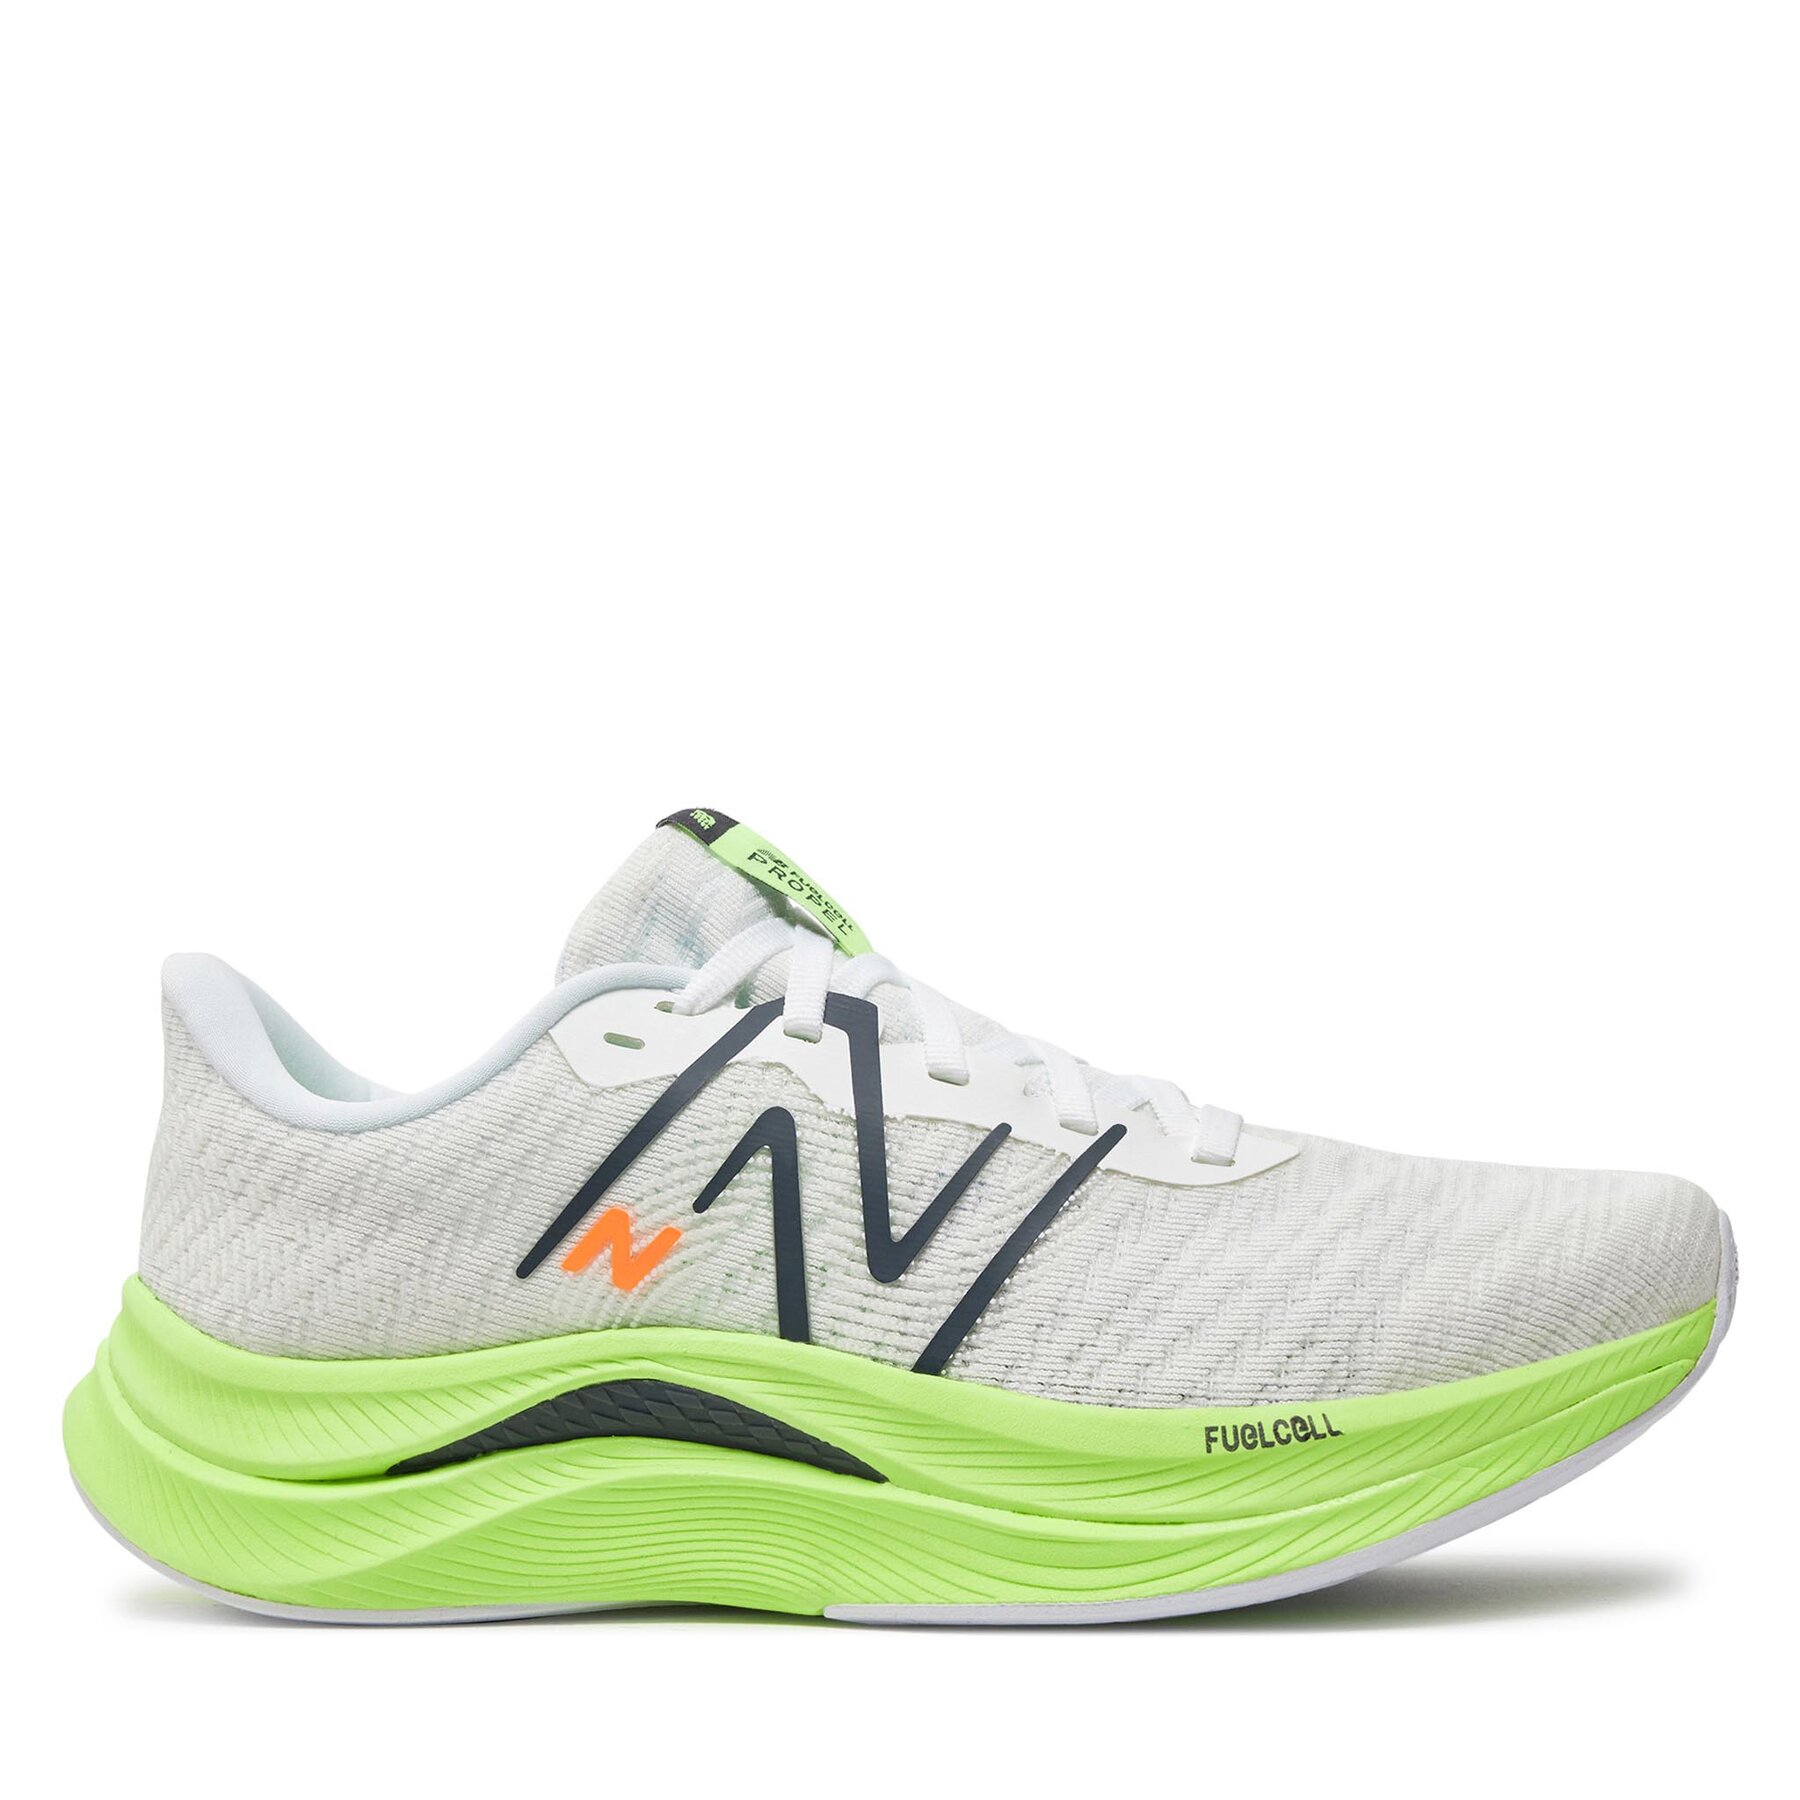 NEW BALANCE FUELCELL PROPEL V4 - Zapatos